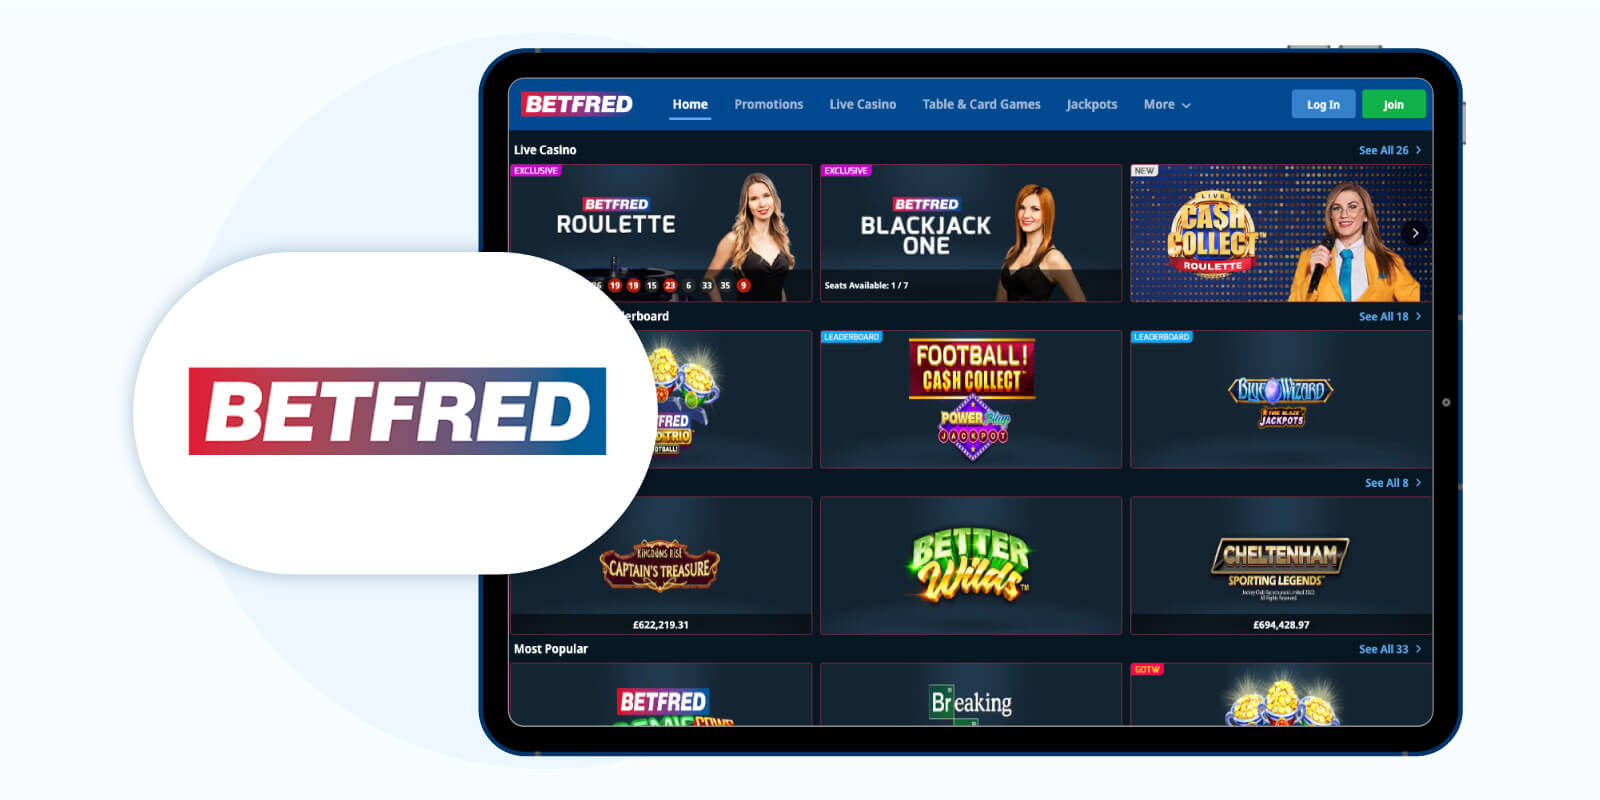 Betfred Casino - Best IGT Casino For Fast Withdrawals